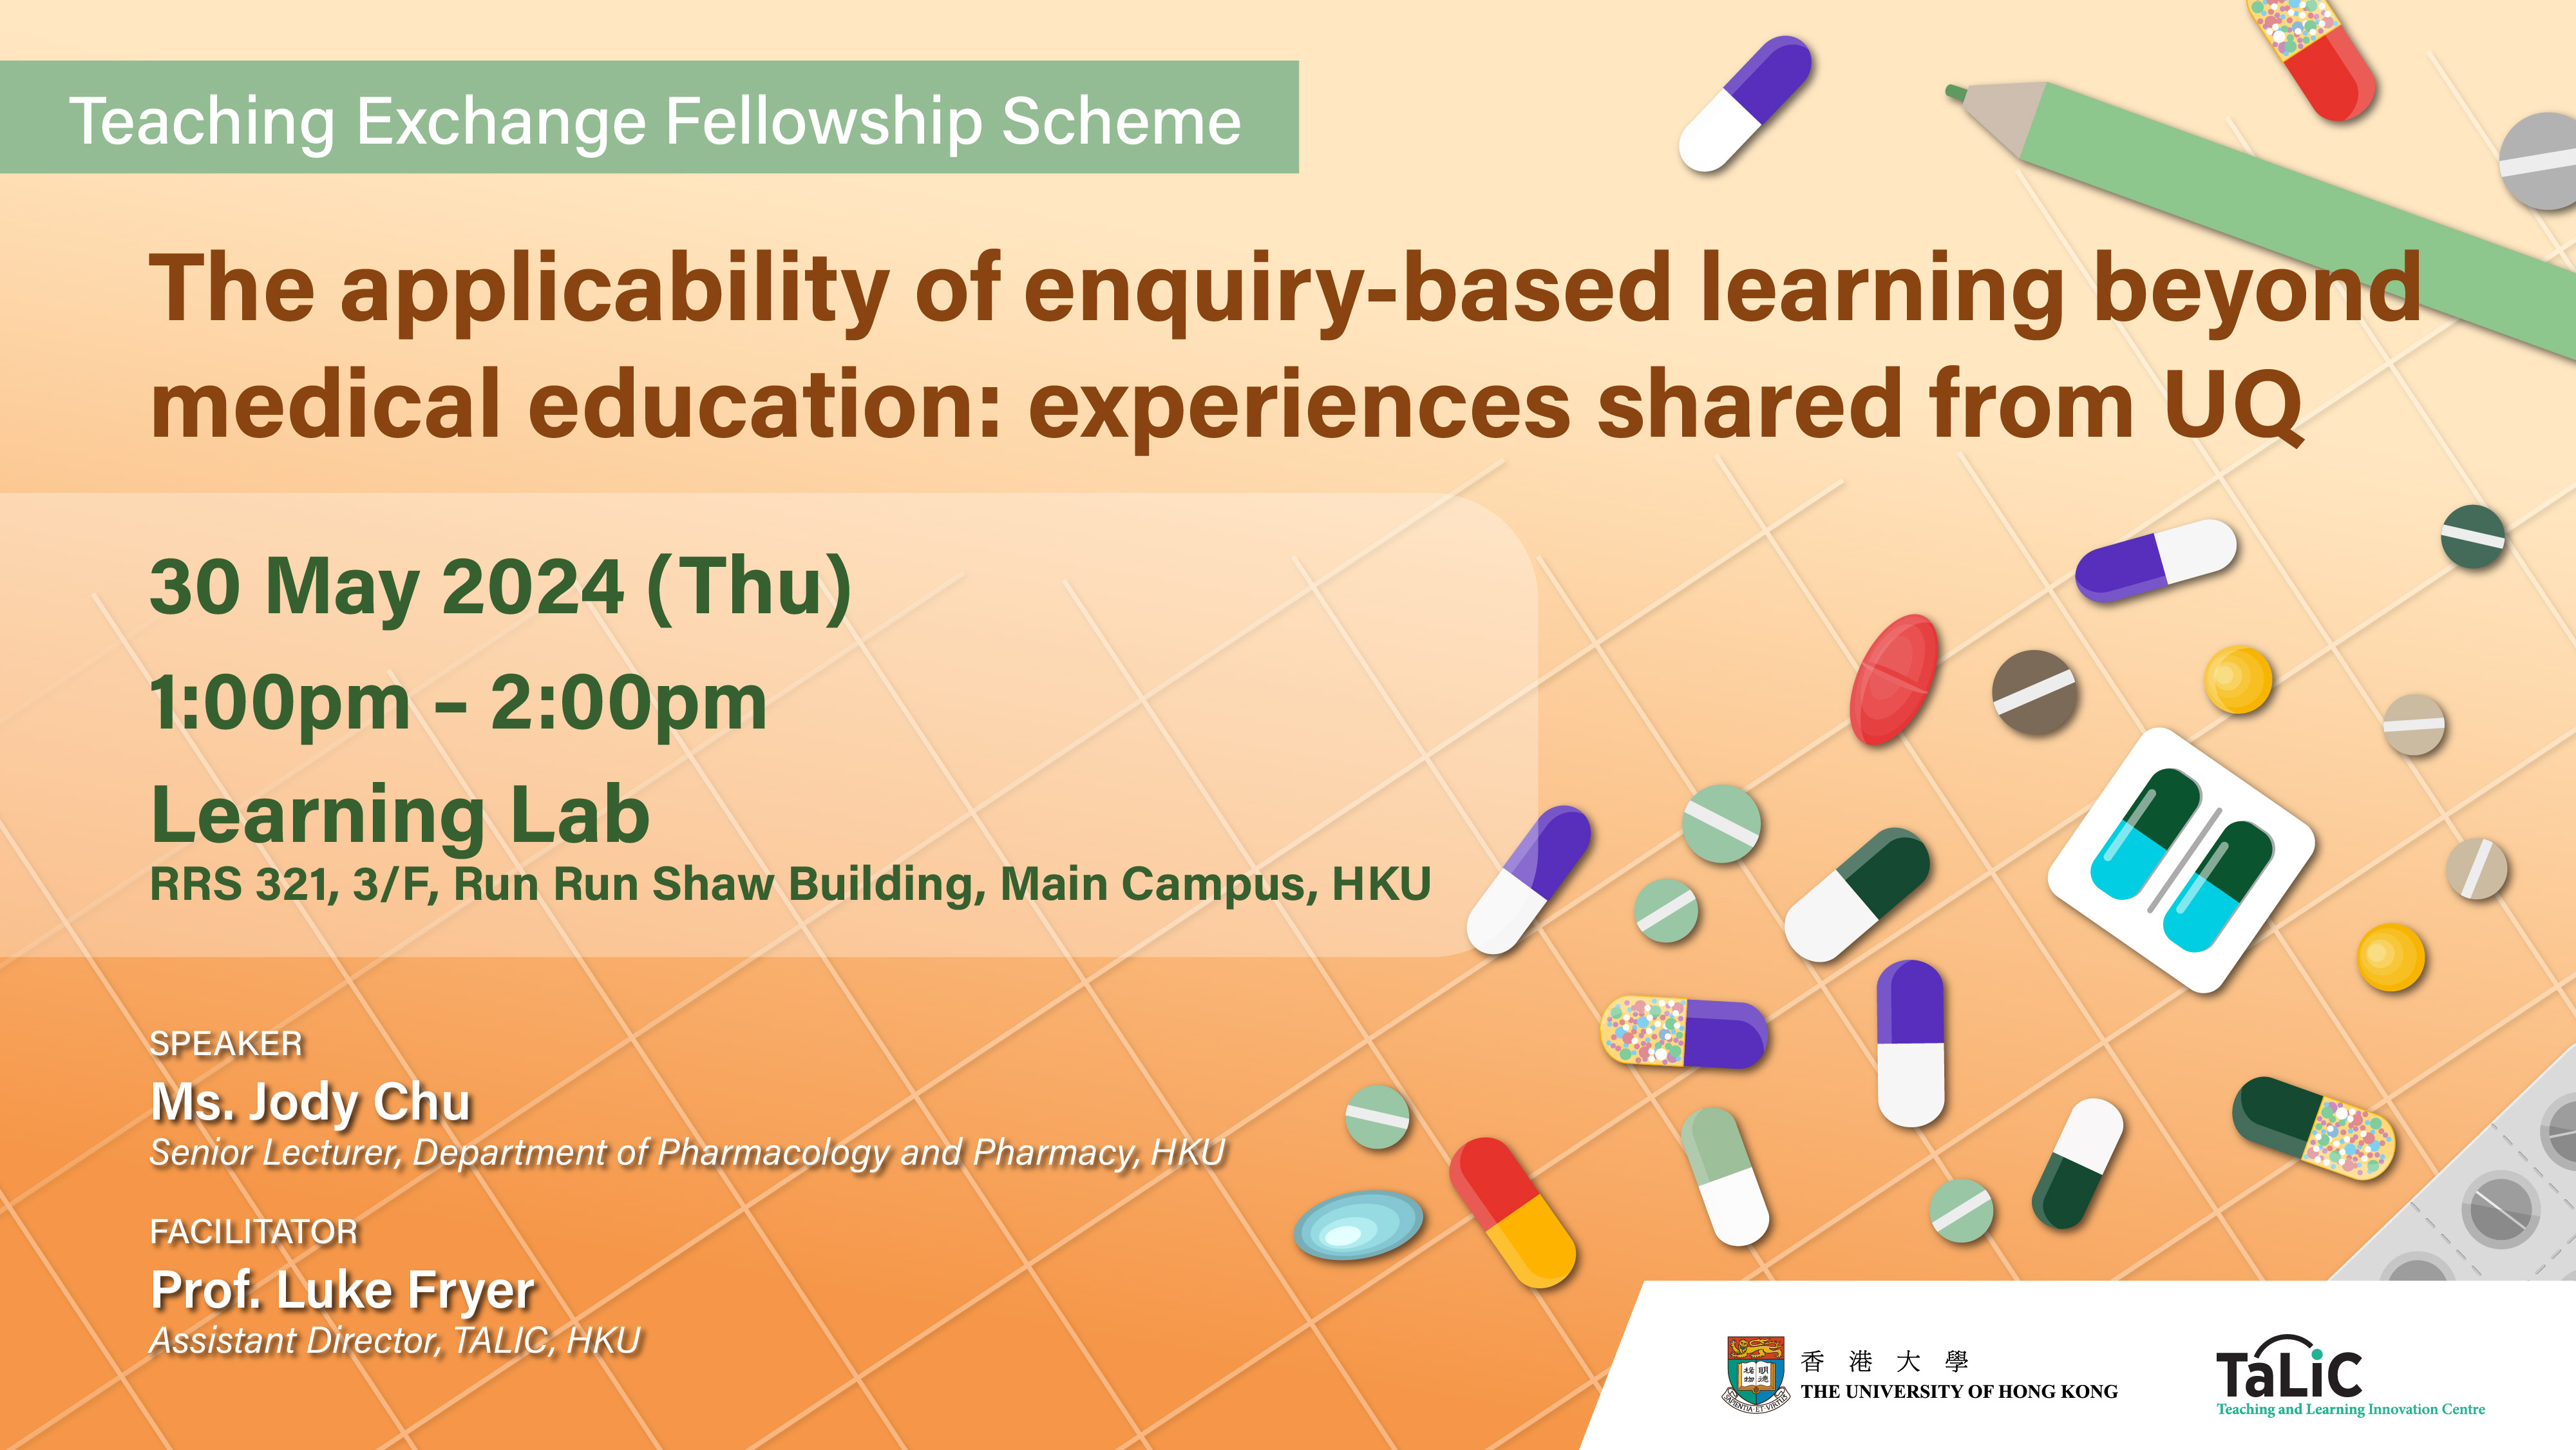 Teaching Exchange Fellowship Scheme Seminar – The applicability of Enquiry-based learning beyond medical education: experiences shared from UQ